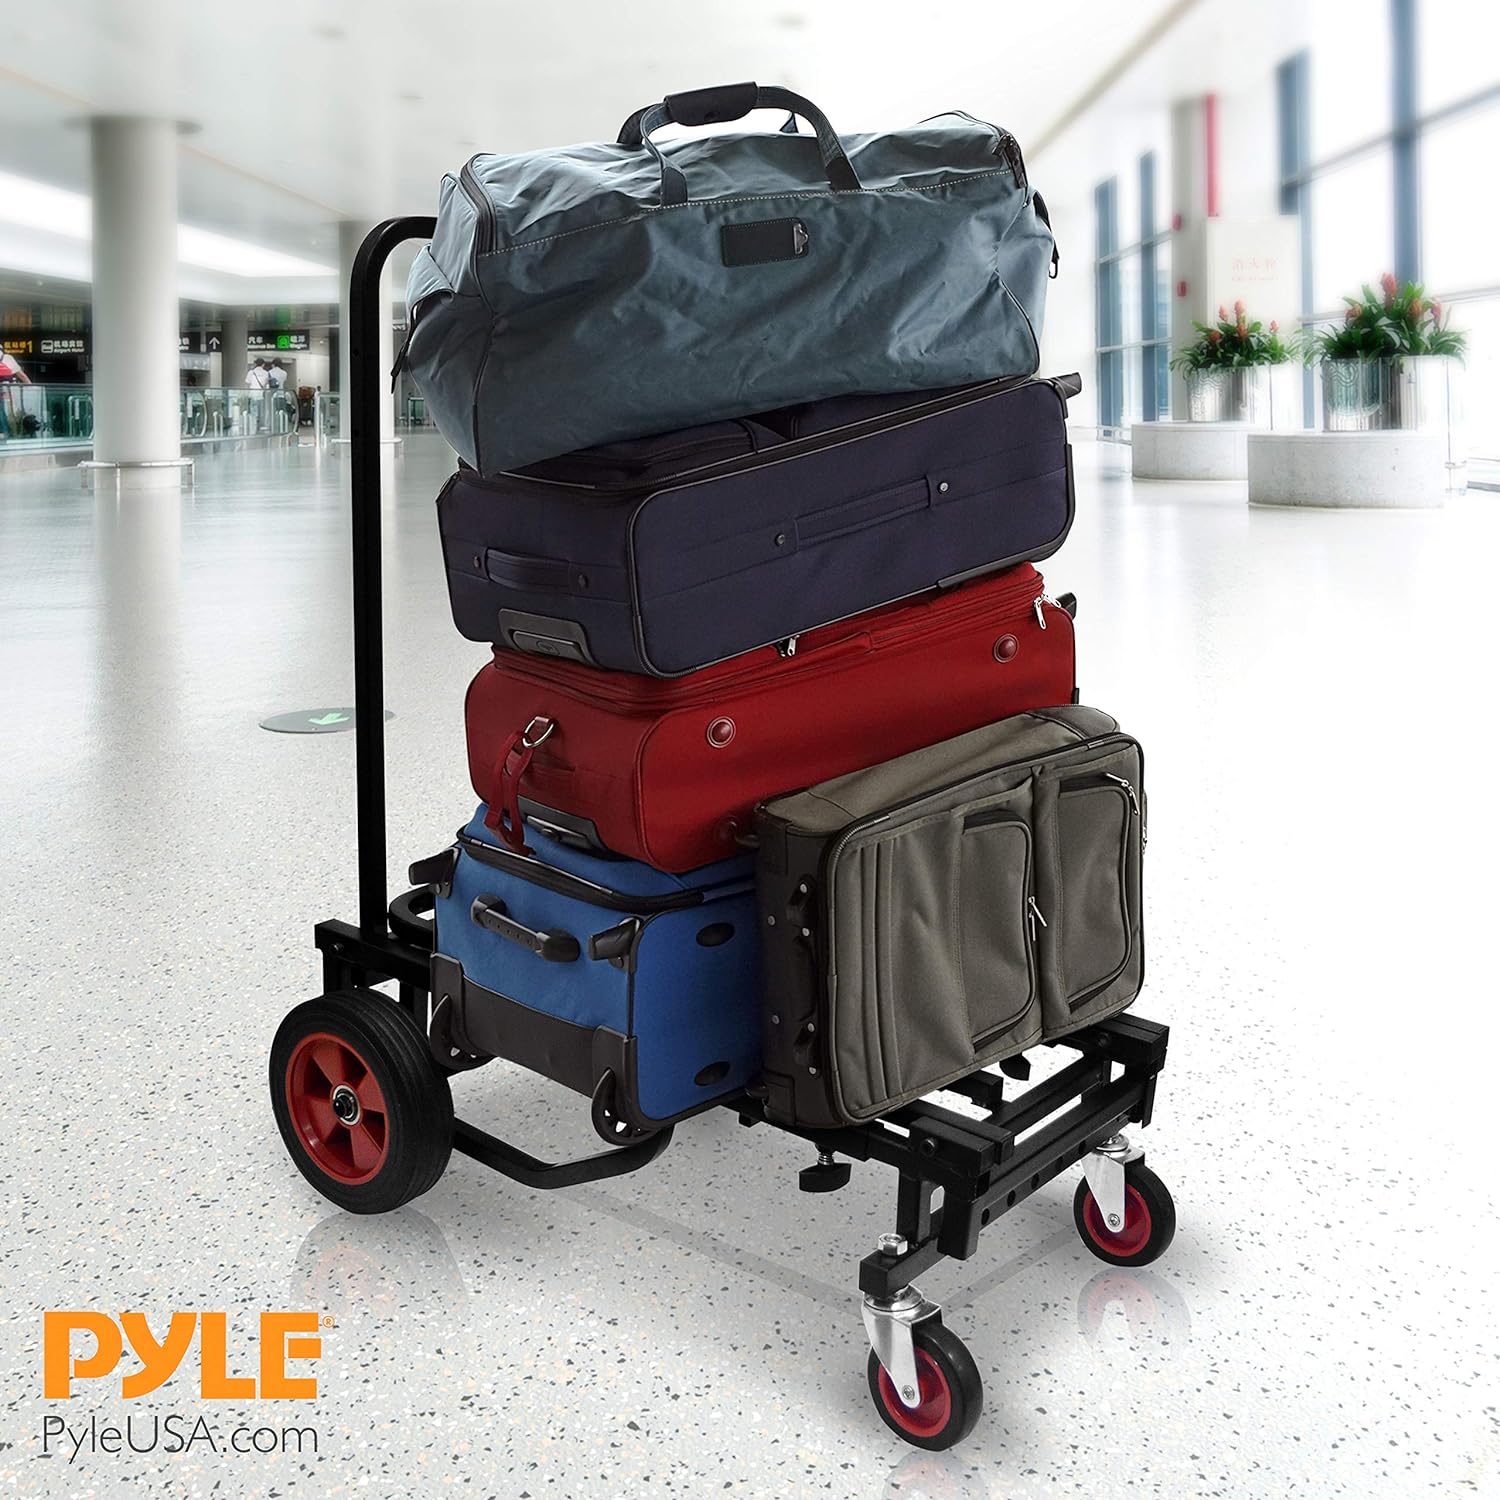 Pyle Adjustable Professional Equipment Compact 8 in 1 Folding